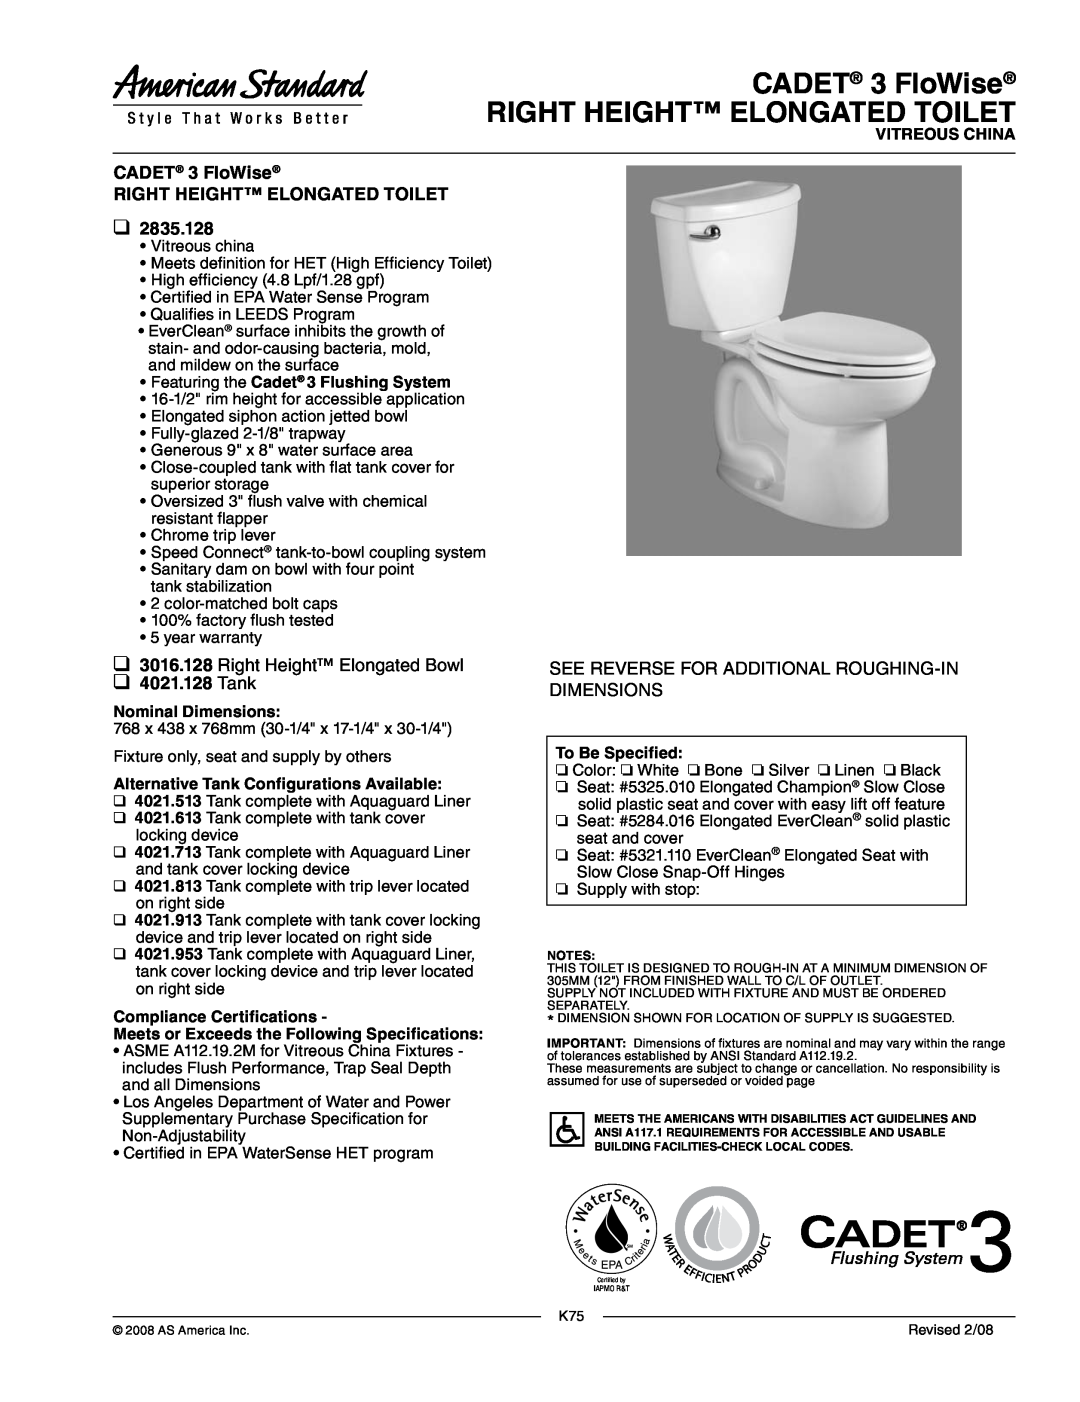 American Standard 3016.128 dimensions CADET 3 FloWise RIGHT HEIGHT ELONGATED TOILET, Vitreous China, Nominal Dimensions 